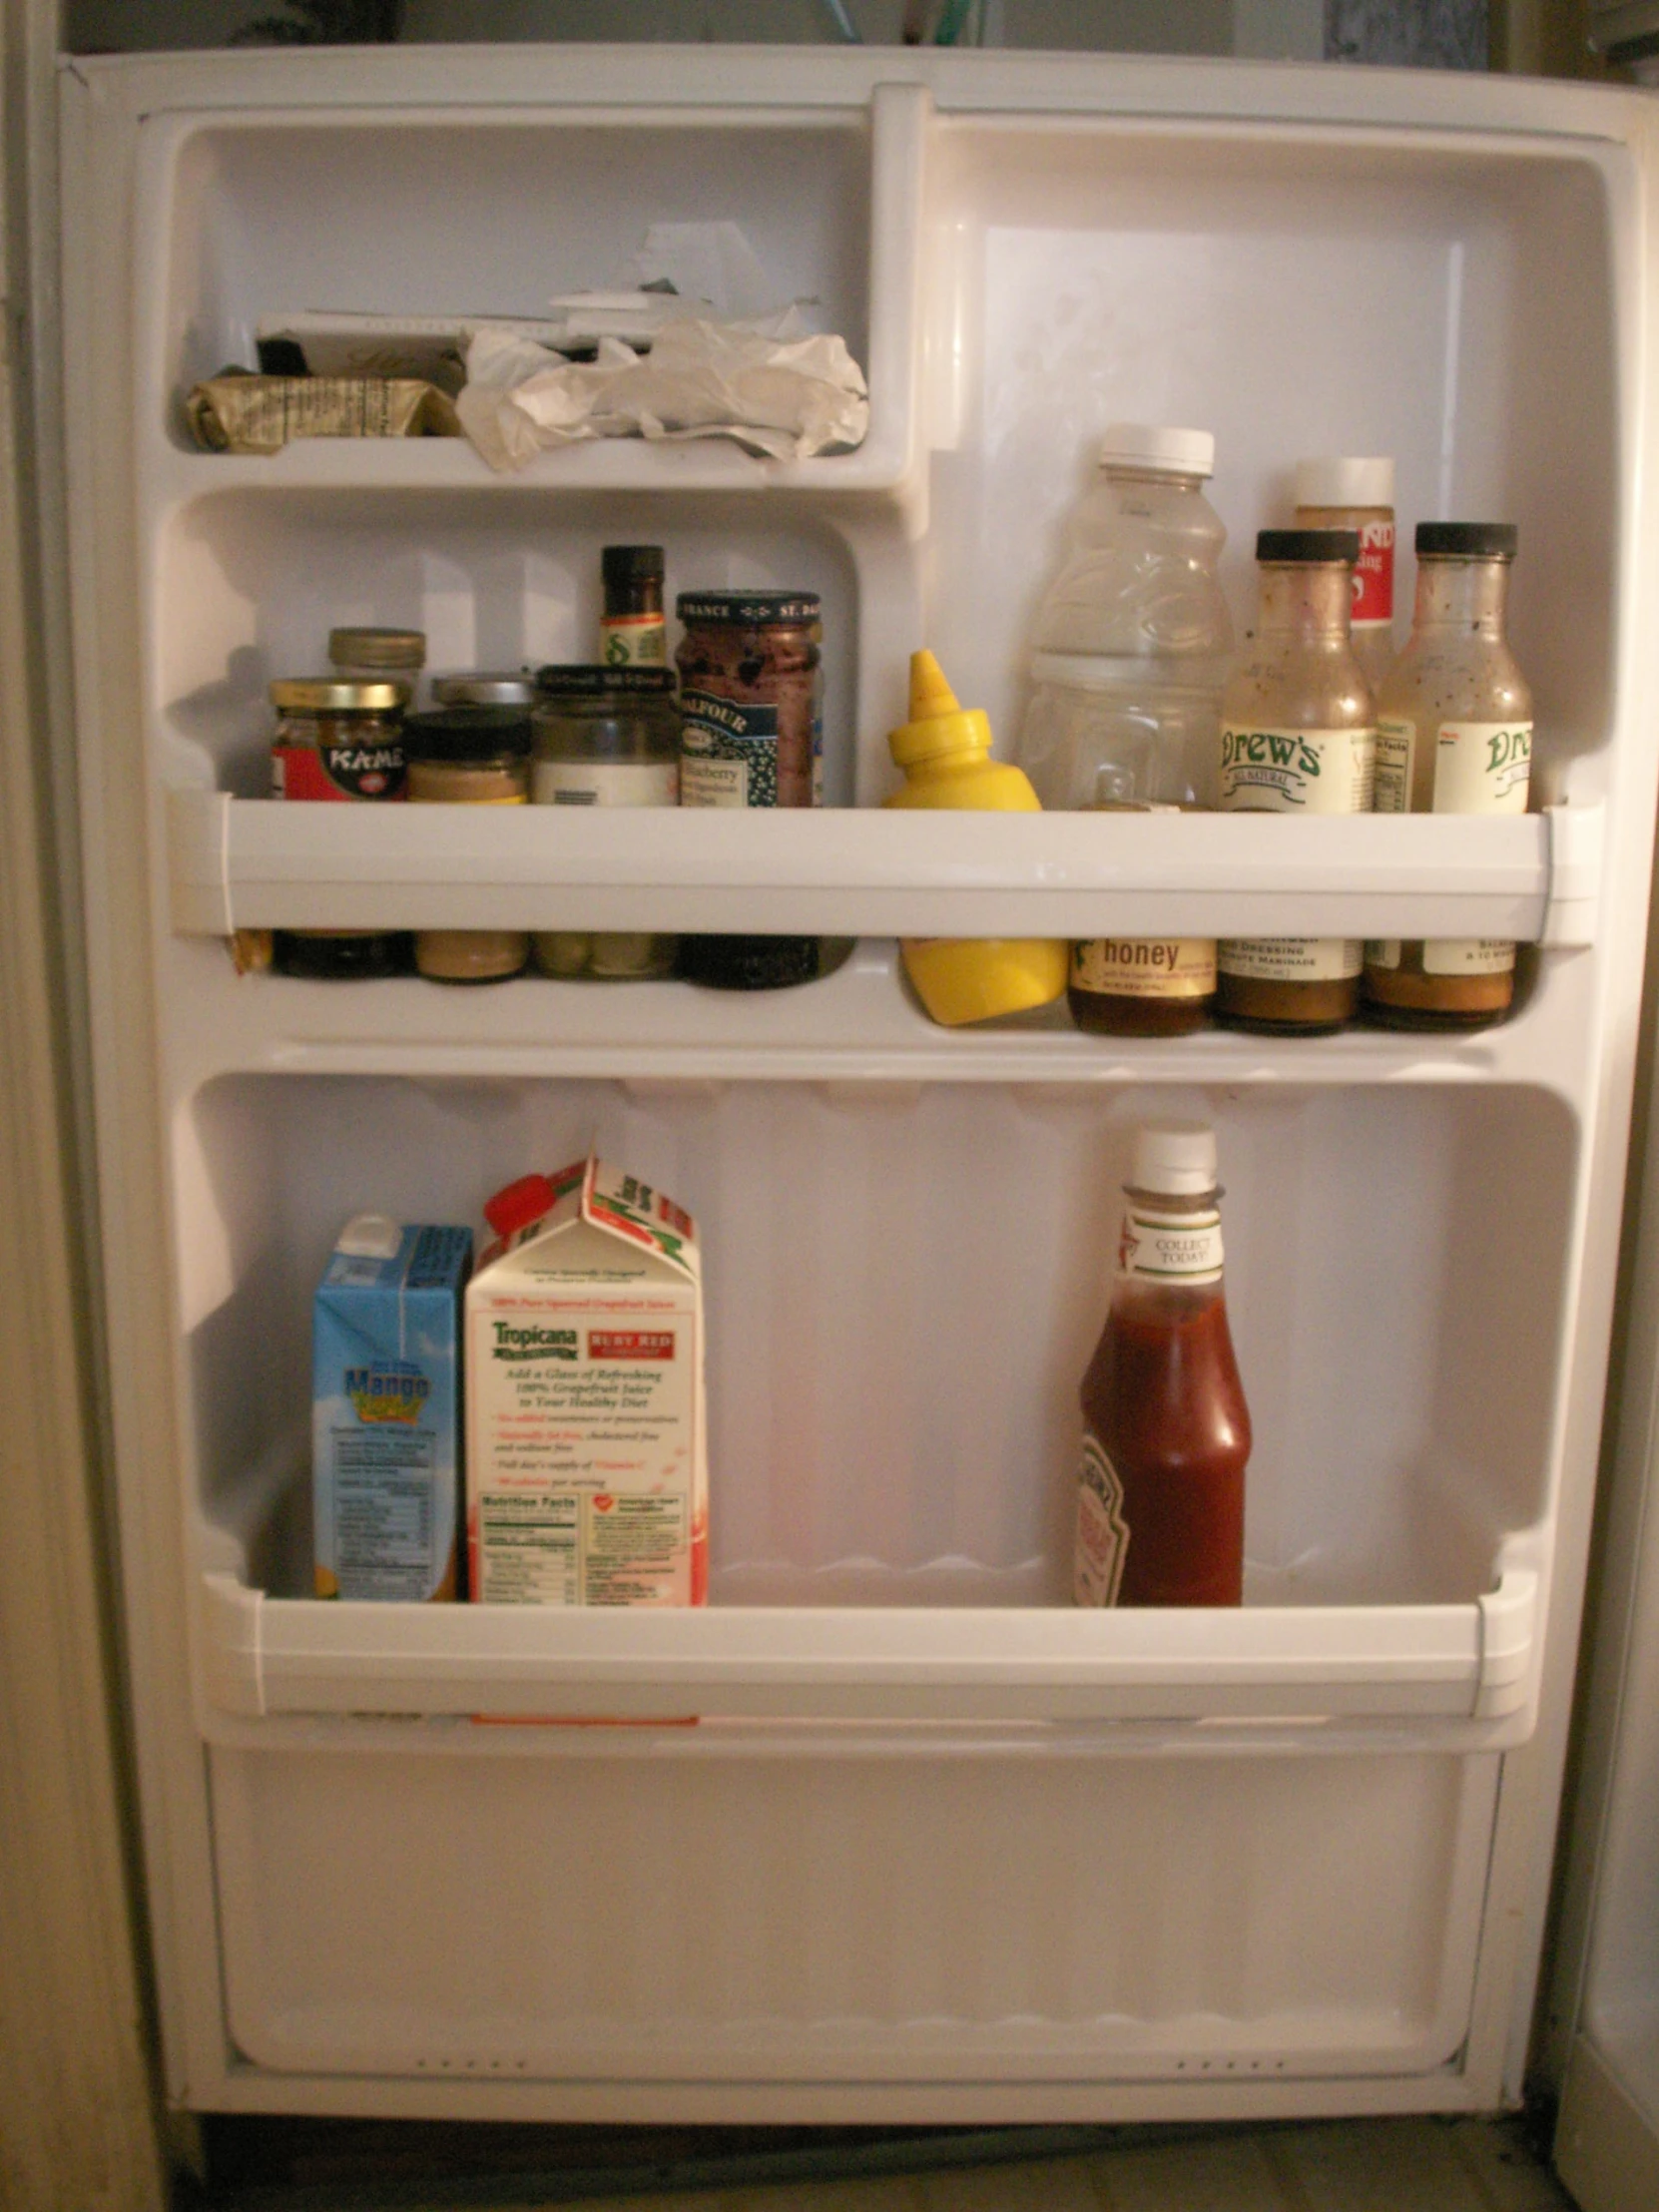 a refrigerator has food and drinks inside it